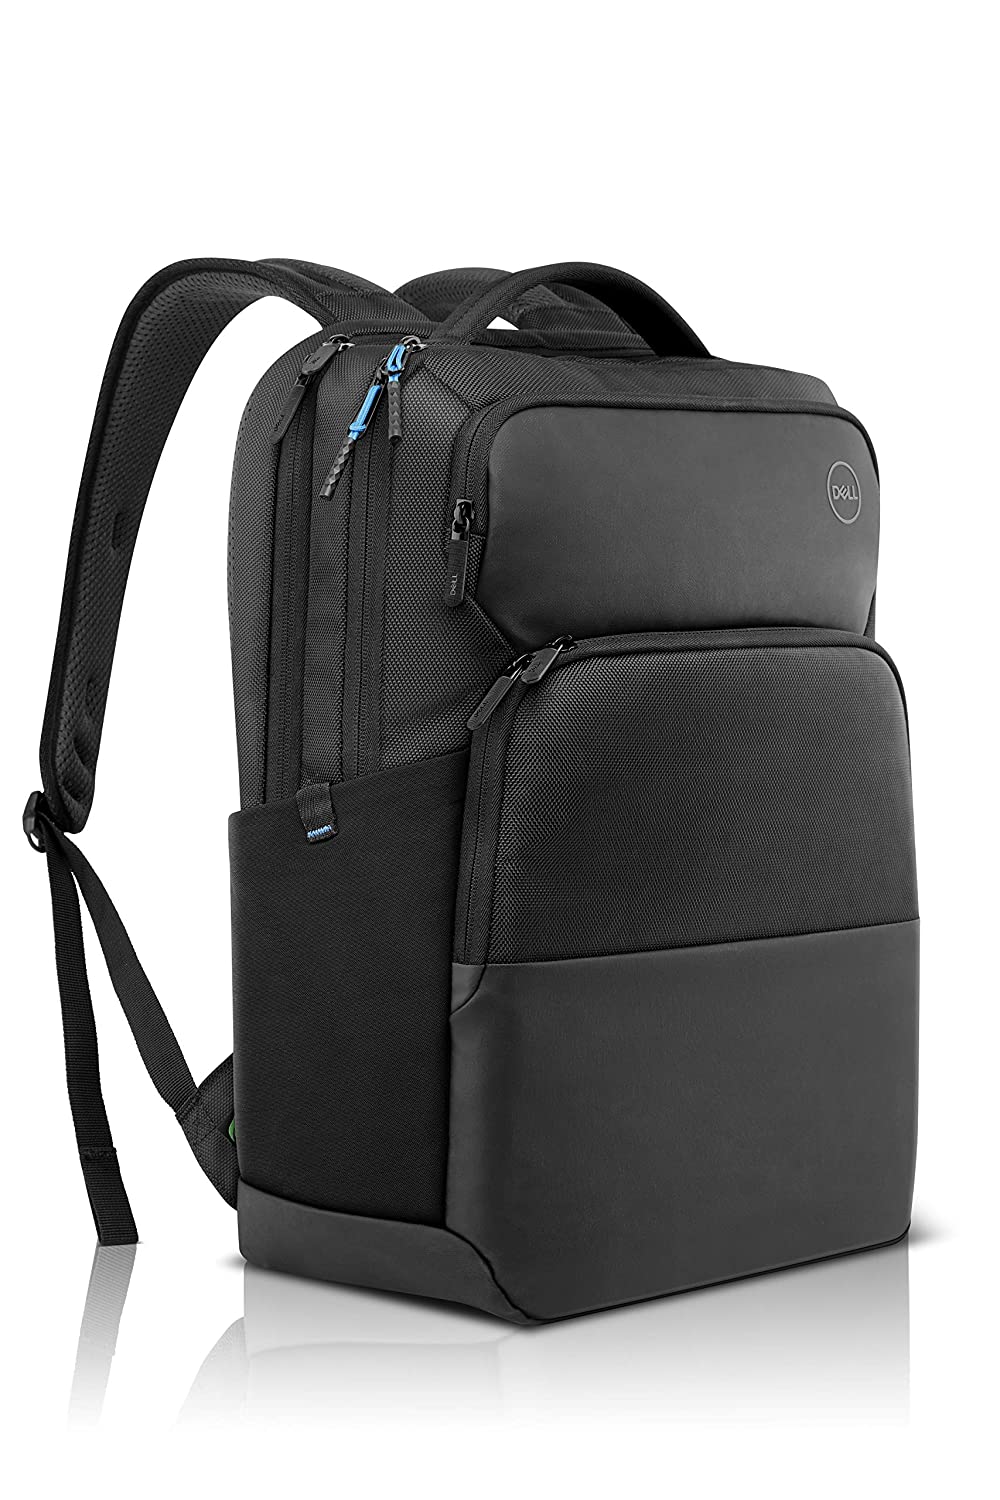 dell-pro-backpack